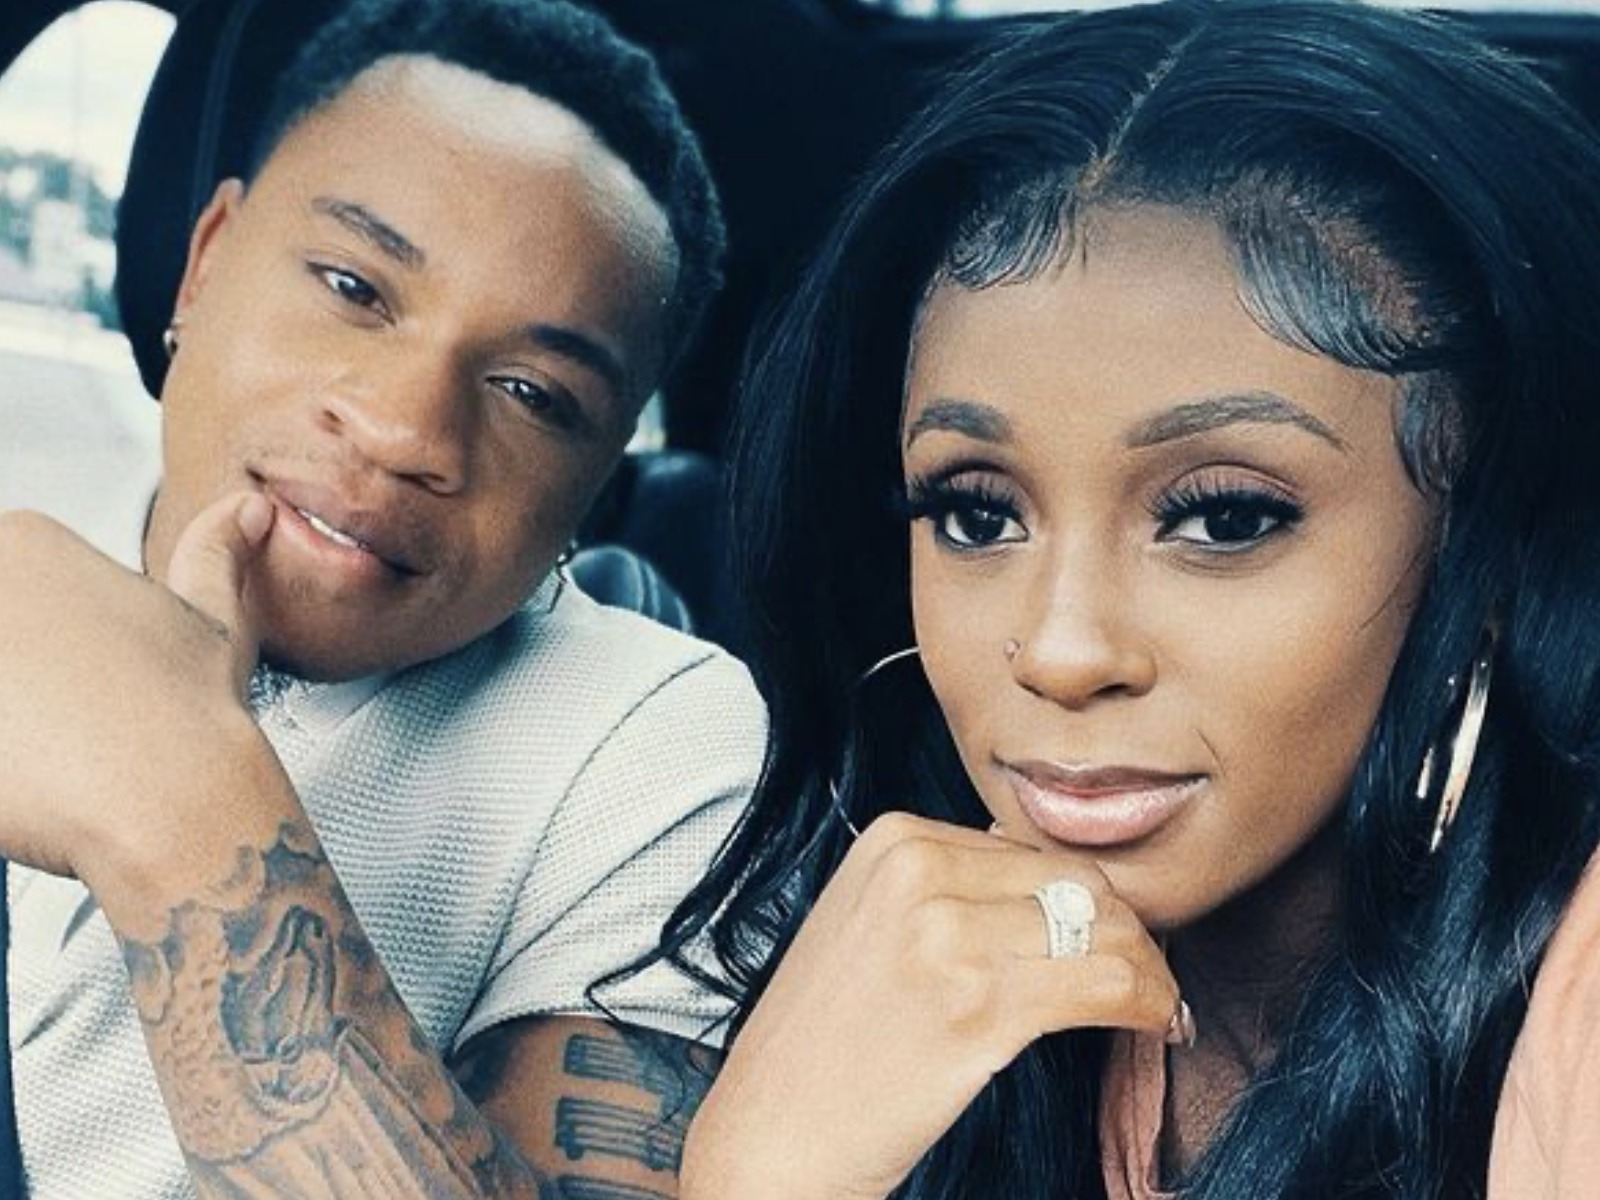 Energy’s Rotimi a.k.a. Dre + Vanessa Mdee Explain Being pregnant